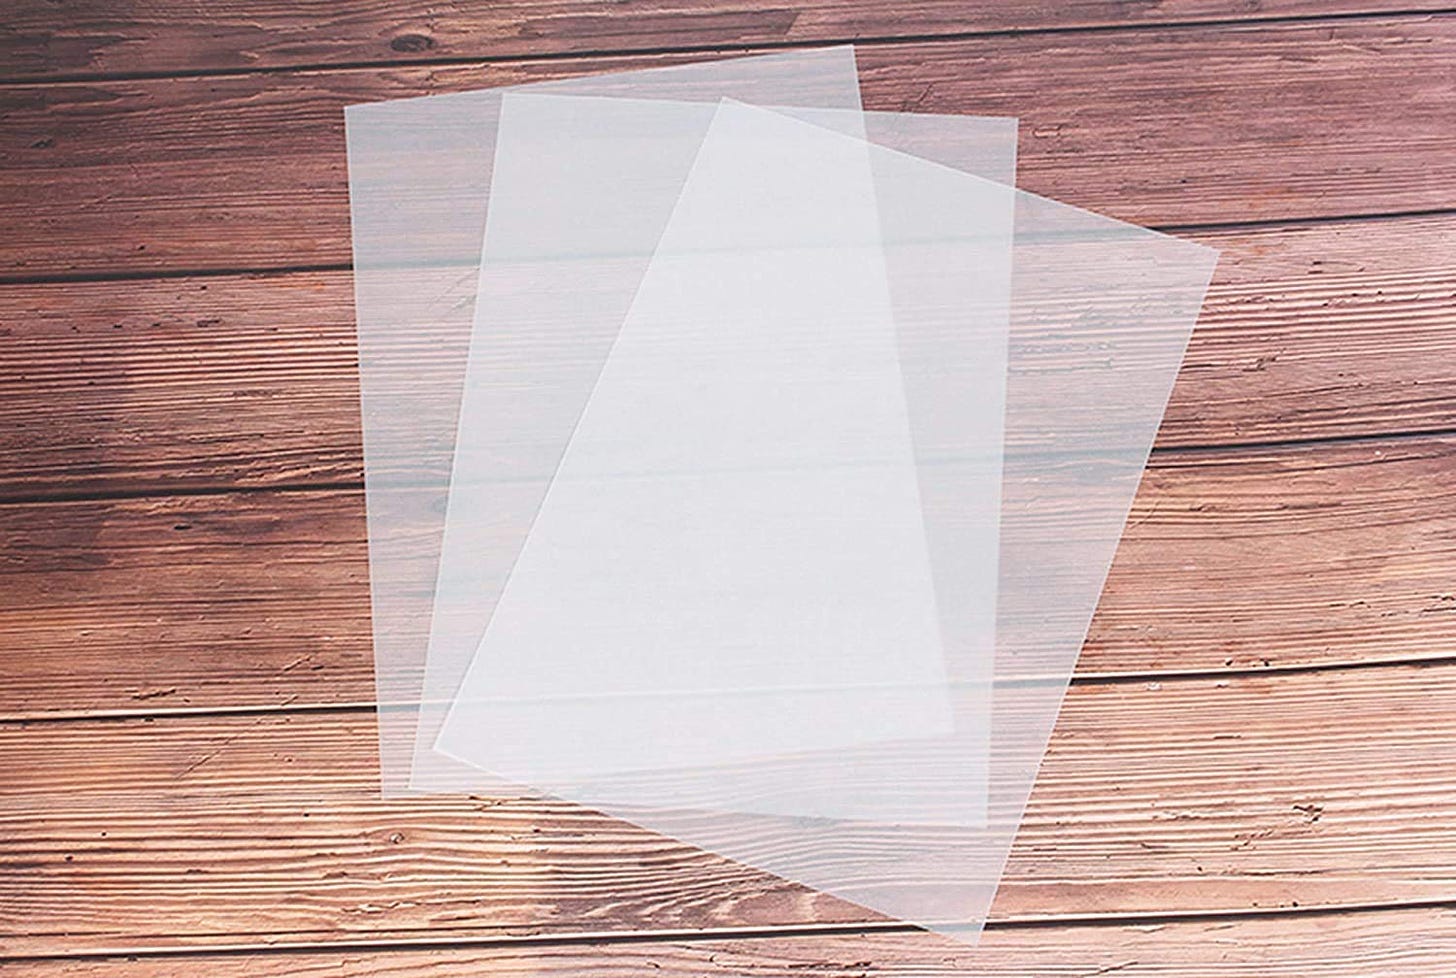 ikis A4 Size Artist's Tracing Paper, 50 Sheets-Translucent Sketching and Tracing  Paper for Pencil, Marker and Ink, Lightweight : Amazon.in: Home & Kitchen